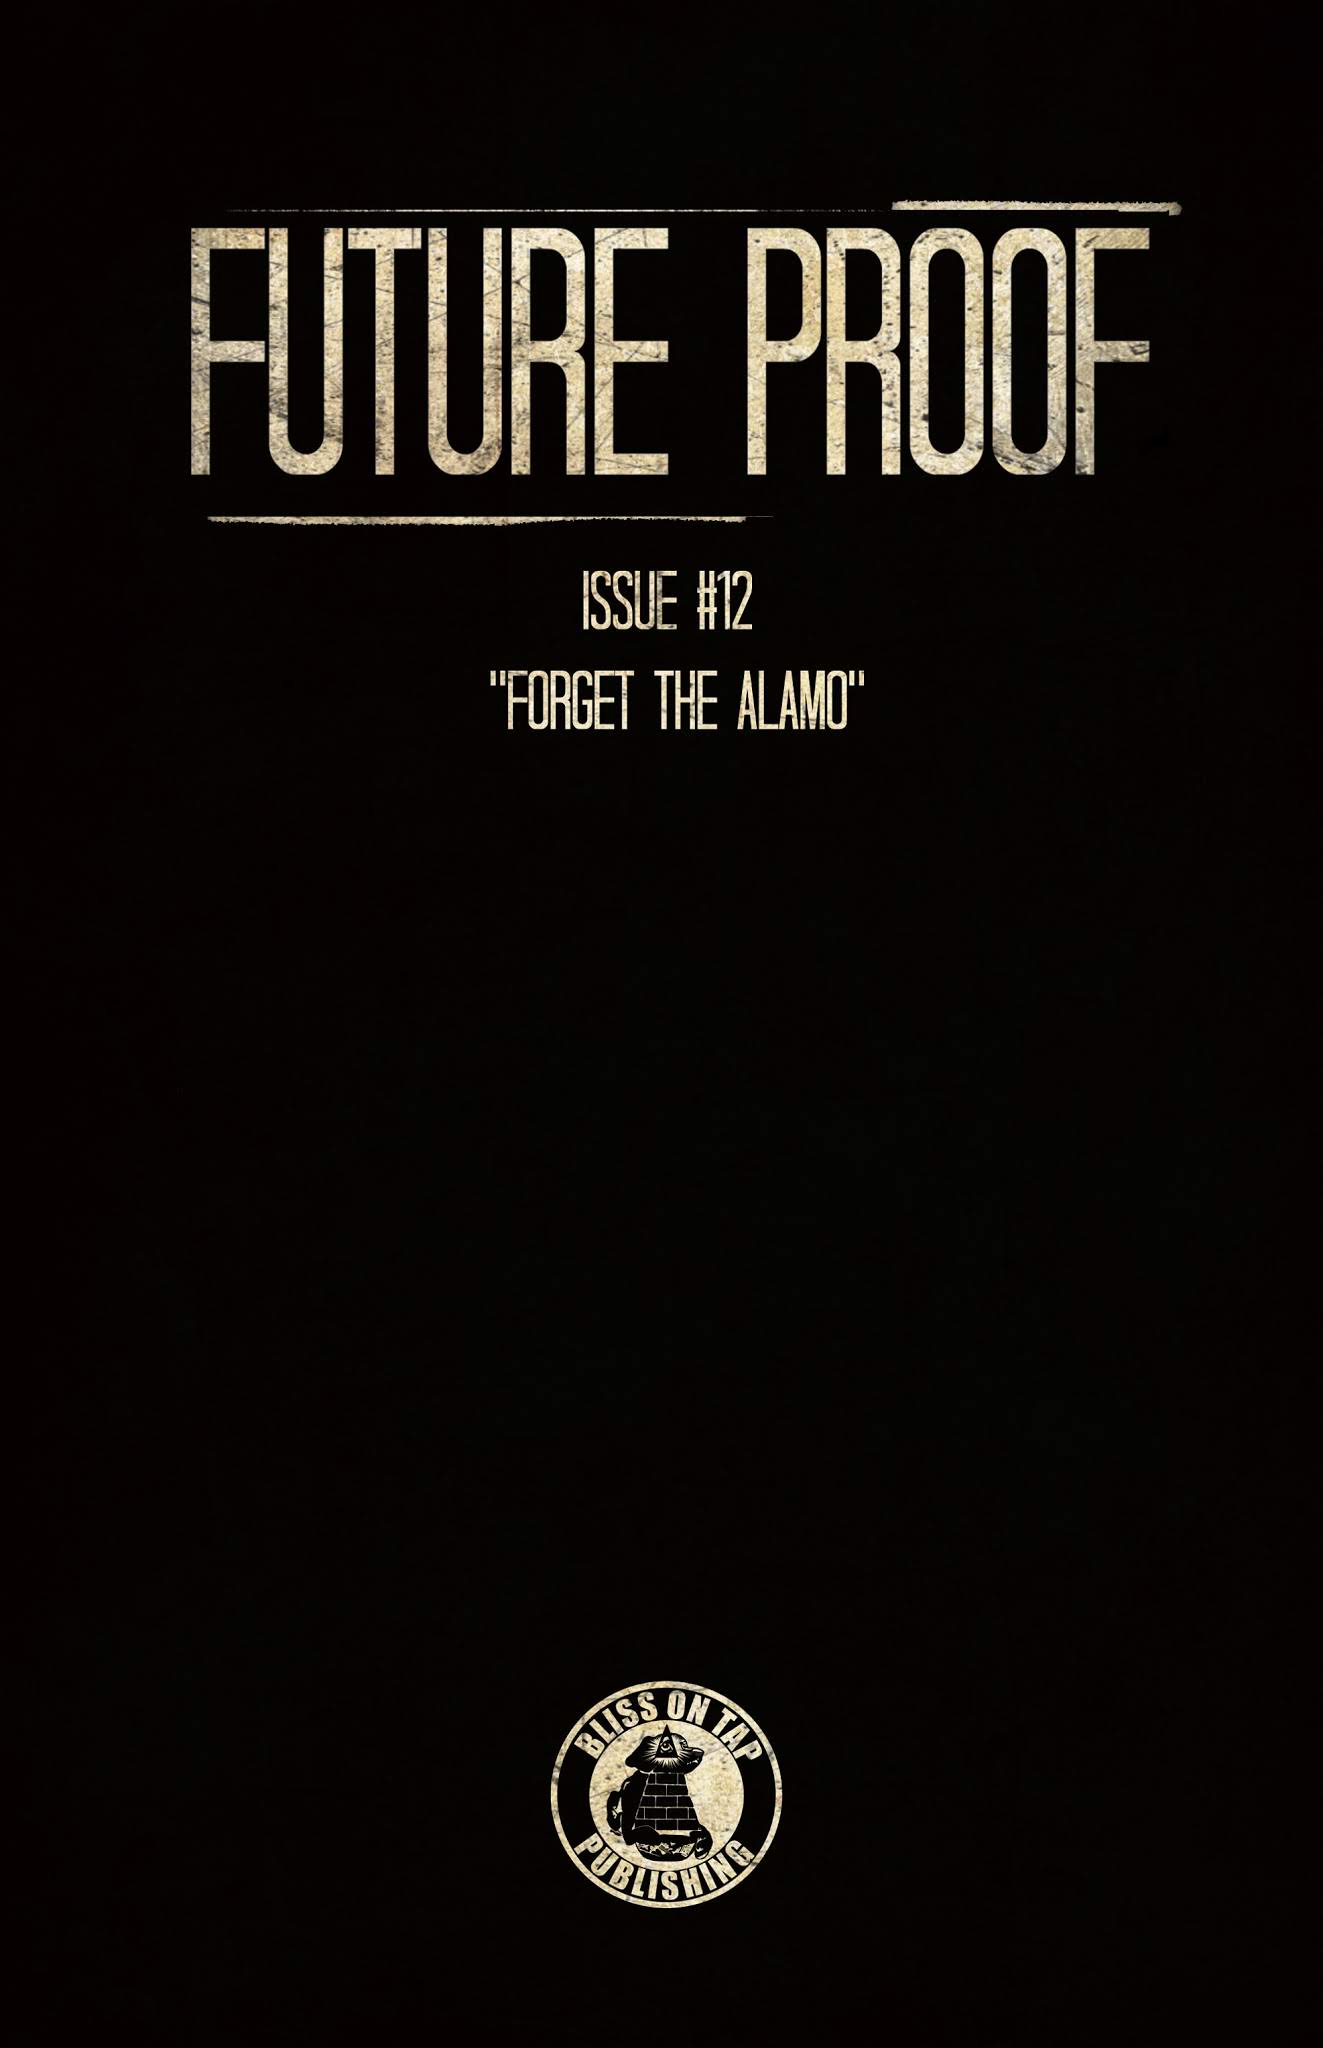 Read online Future Proof comic -  Issue #12 - 2